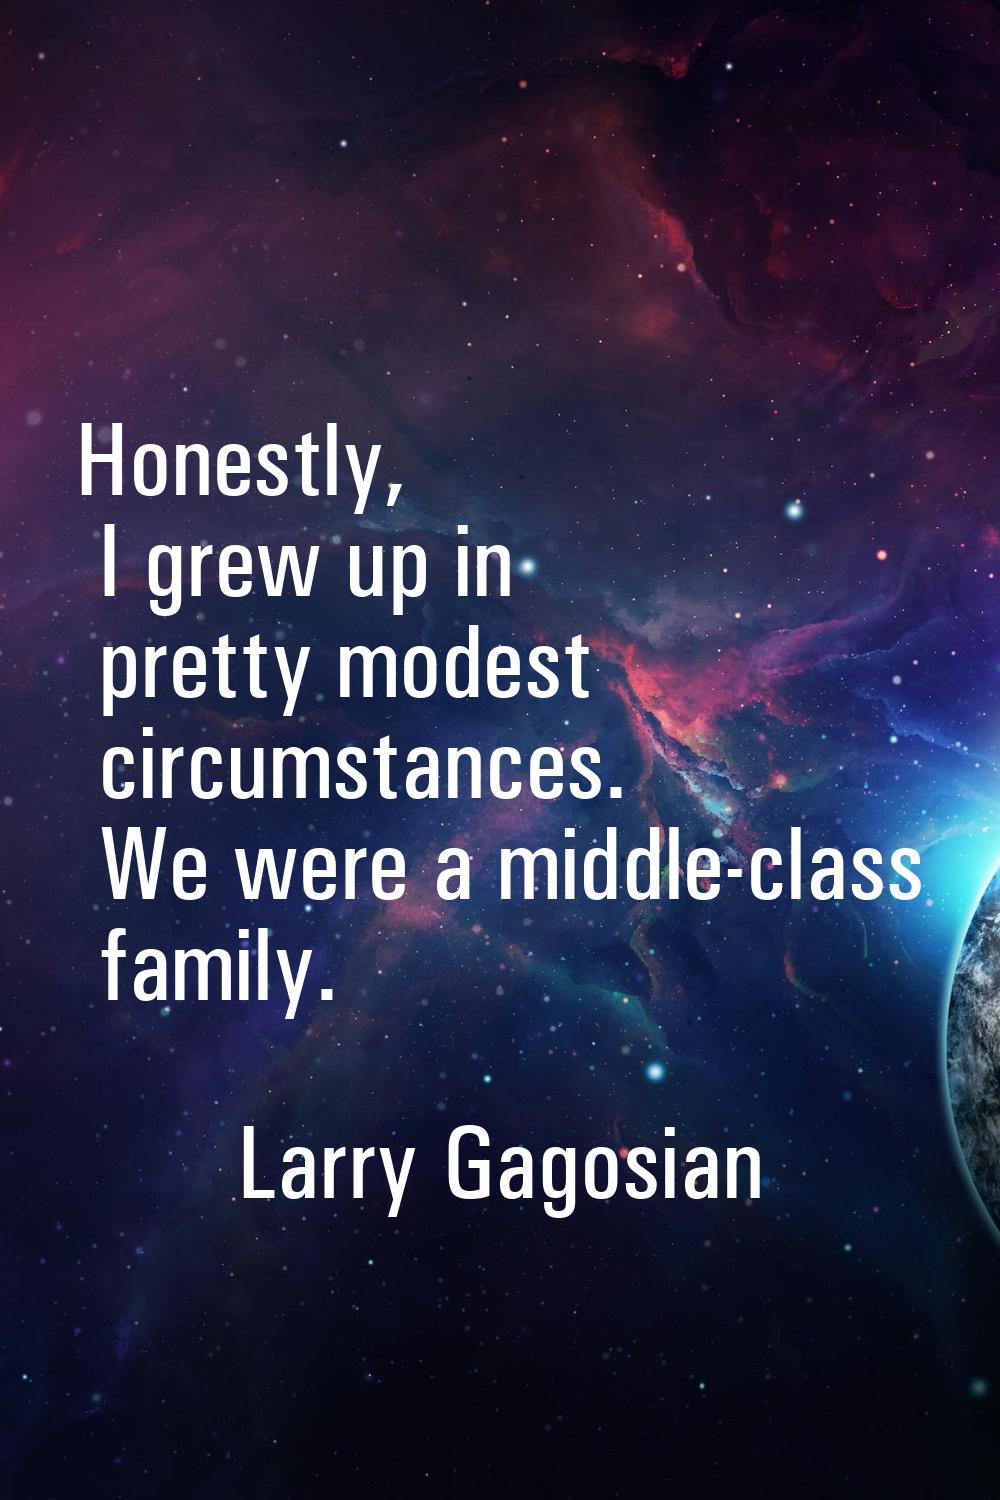 Honestly, I grew up in pretty modest circumstances. We were a middle-class family.